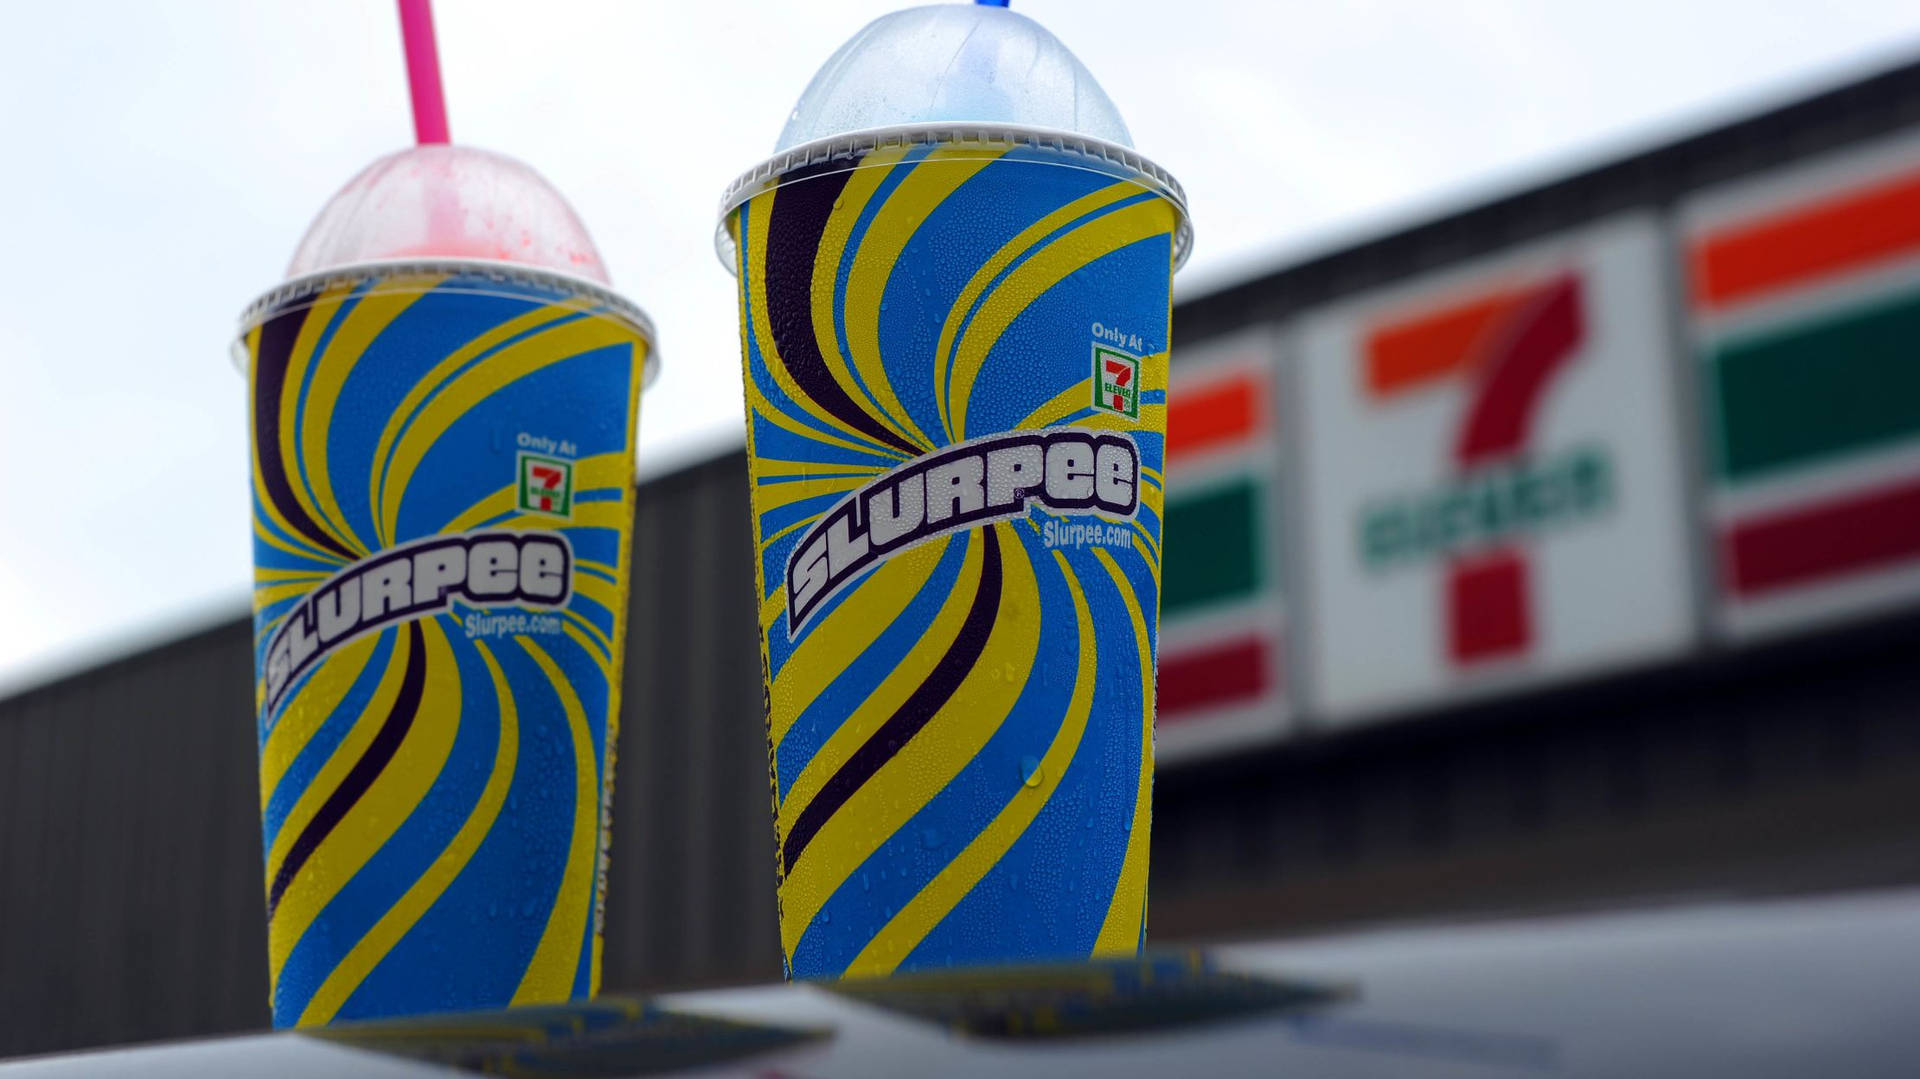 7eleven Slurpee Does Not Need To Be Translated, As It Is A Brand Name That Is Recognized In Spanish-speaking Countries. However, If You Would Like A Translation Of The Sentence 